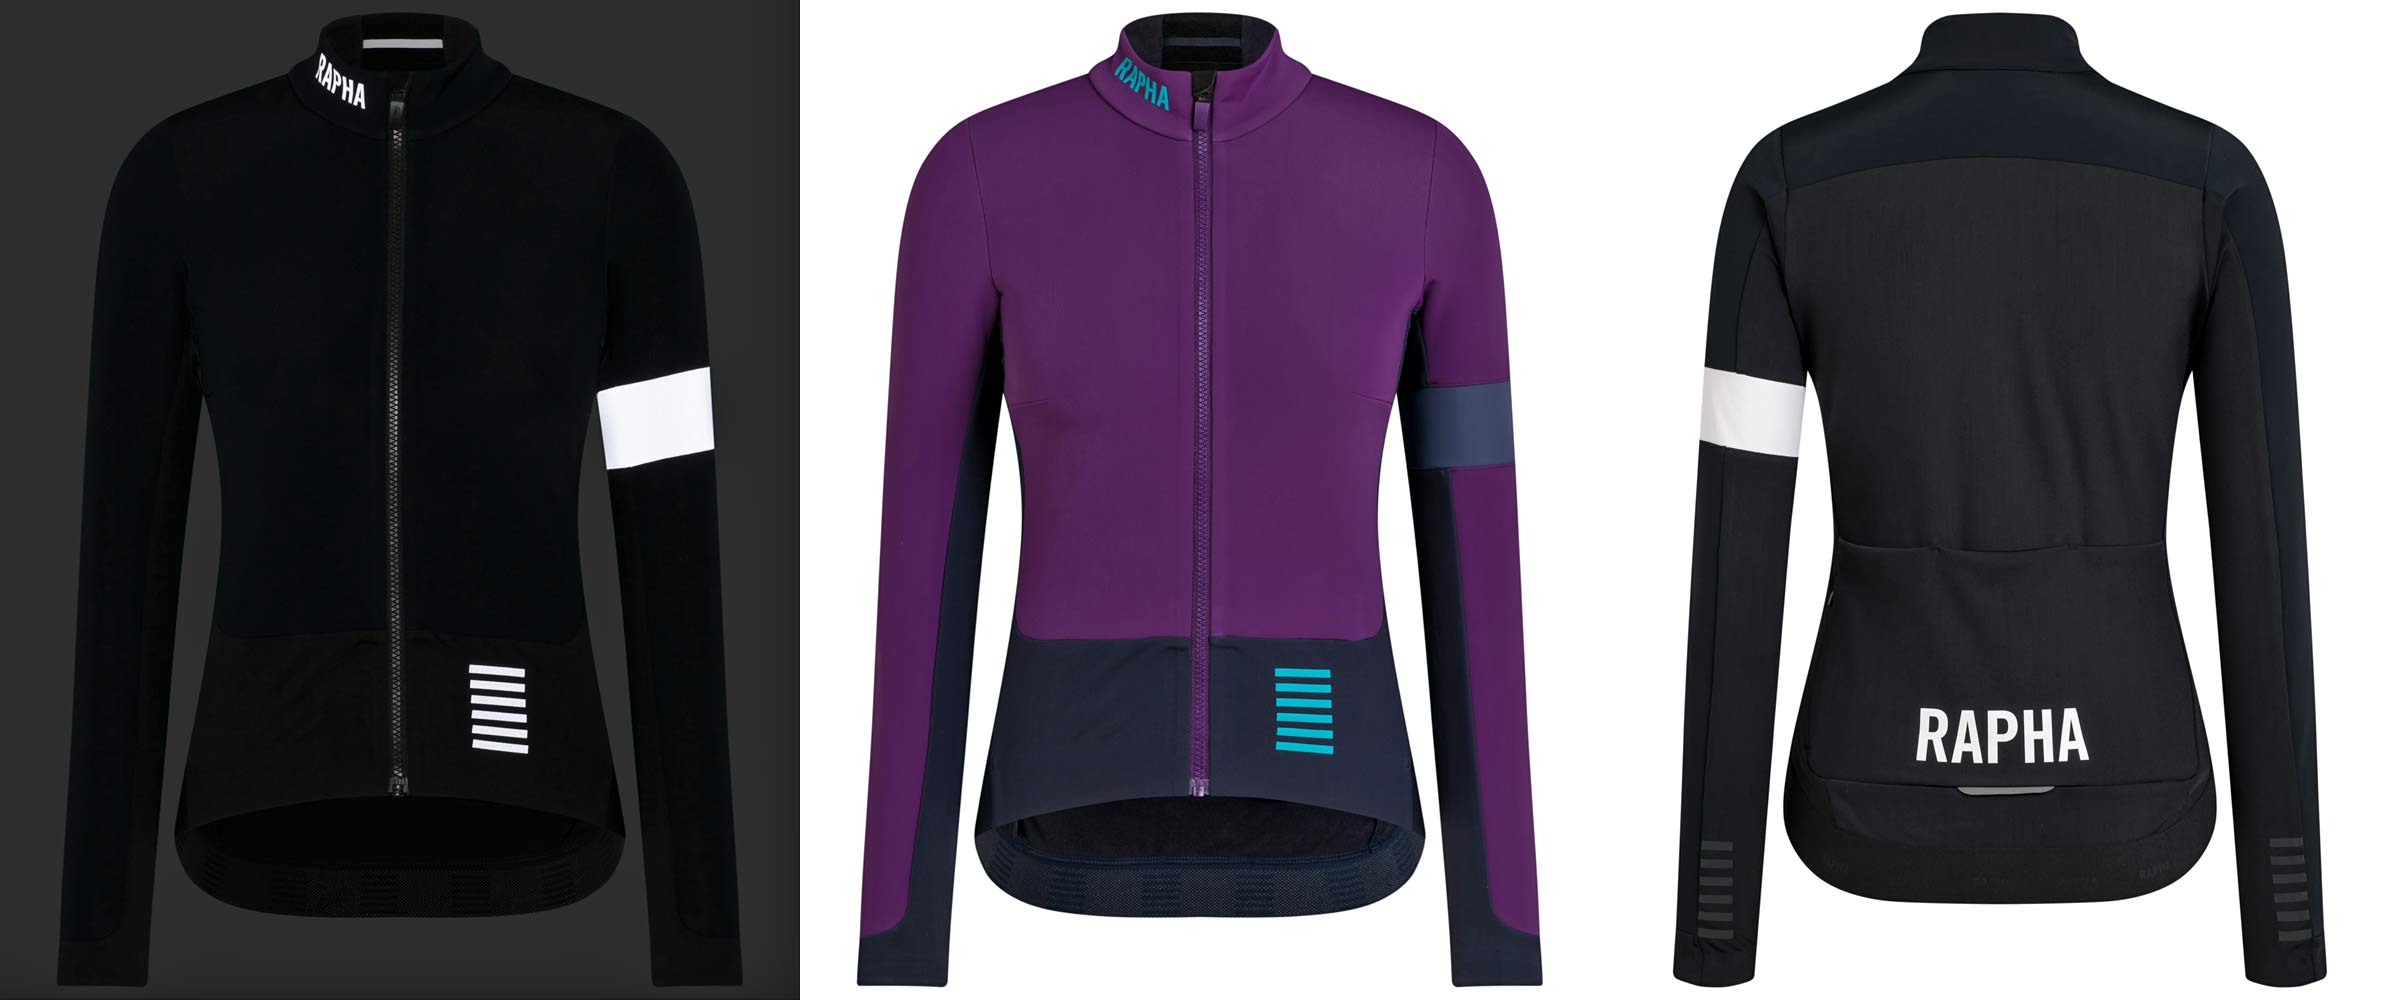 Rapha Pro Team Winter road riding racing training collection, Pro Team Winter Jacket, women's colors